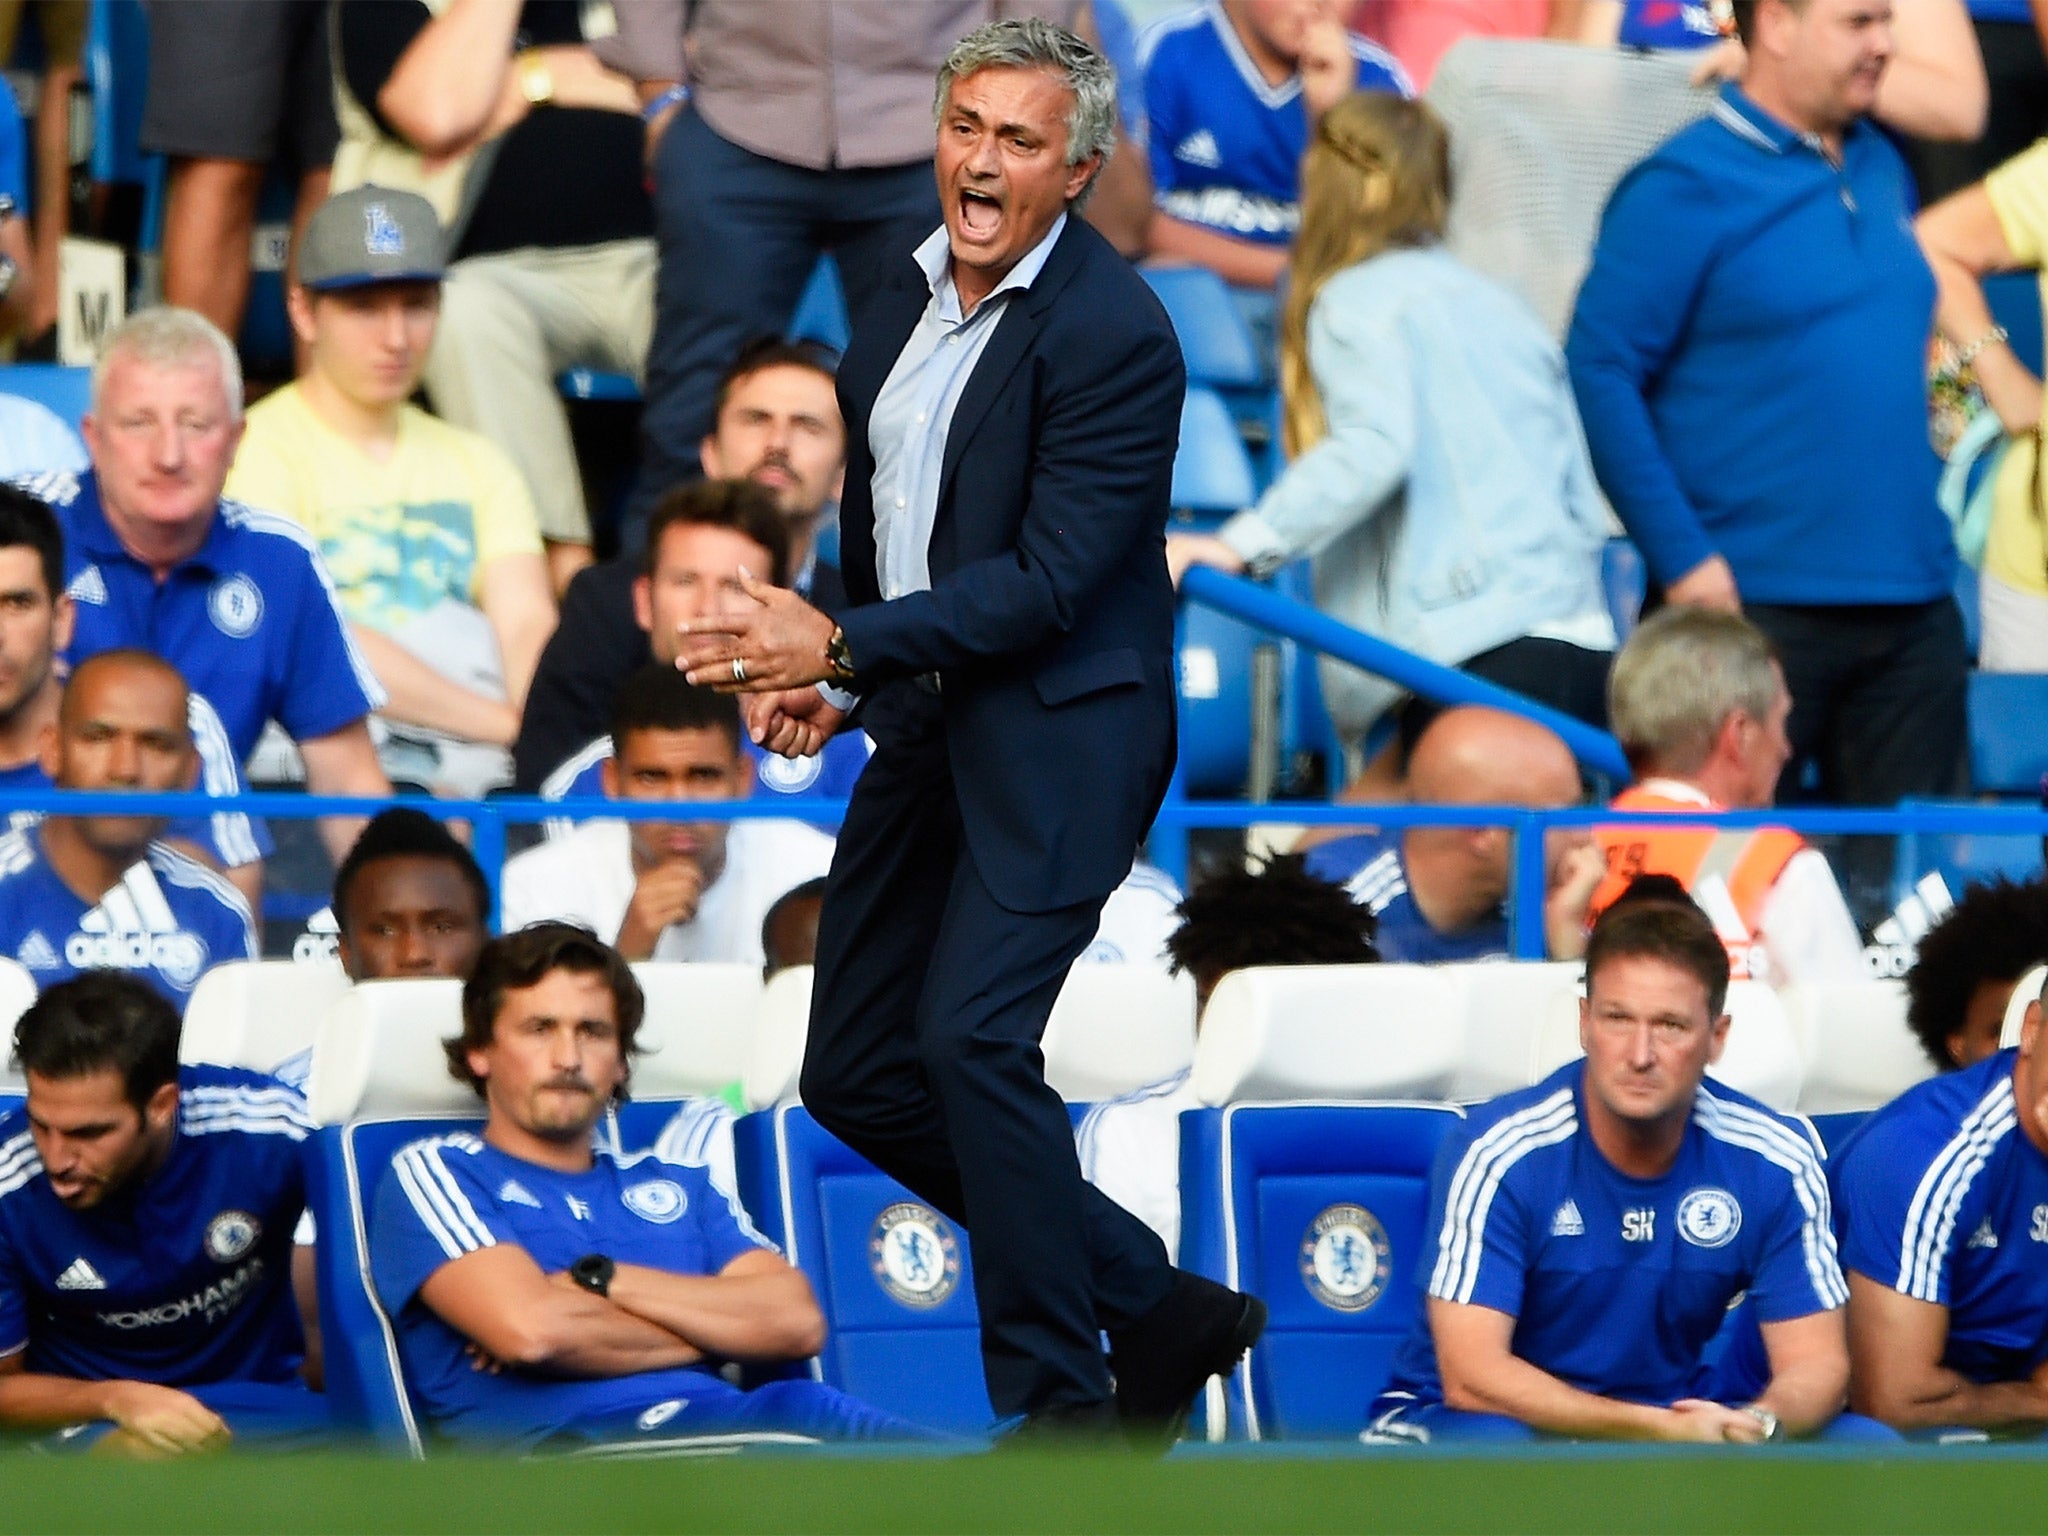 Jose Mourinho lost his cool as the Chelsea medical team ran on the pitch to attend to Hazard